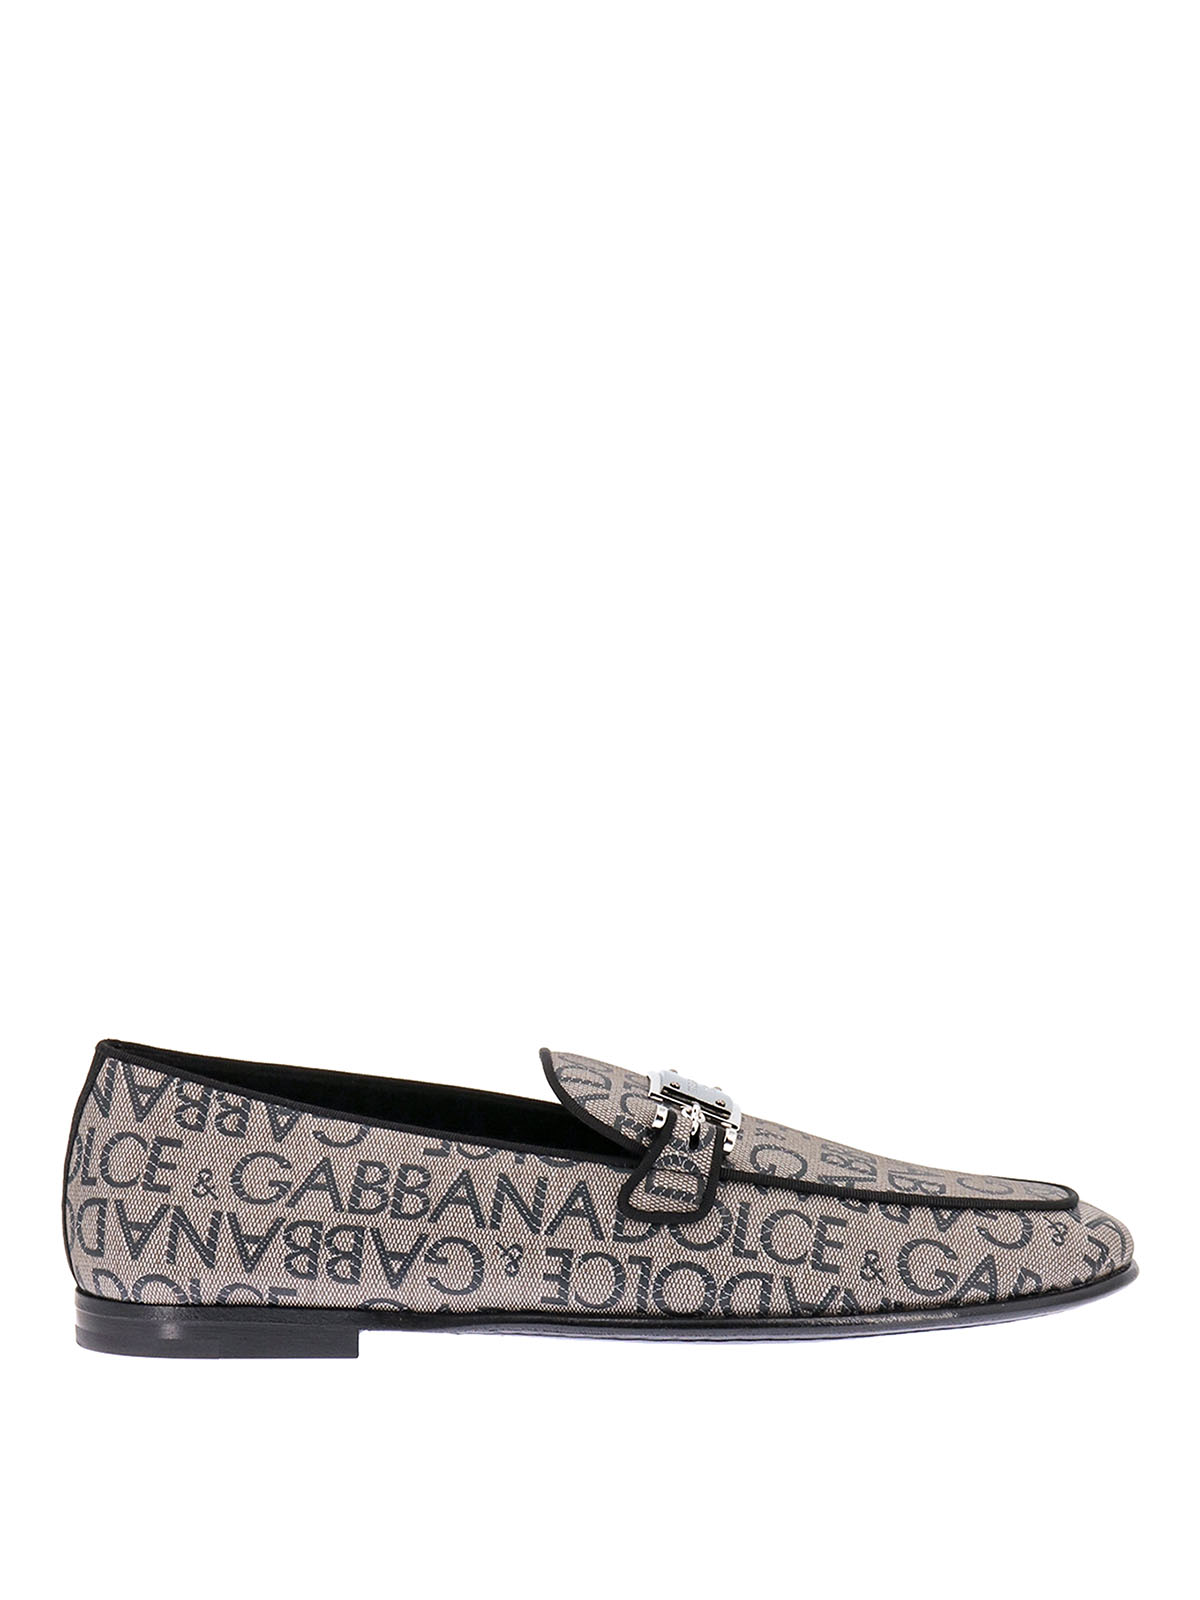 Dolce & Gabbana Loafers With All-over Lettering Logo Print In Grey